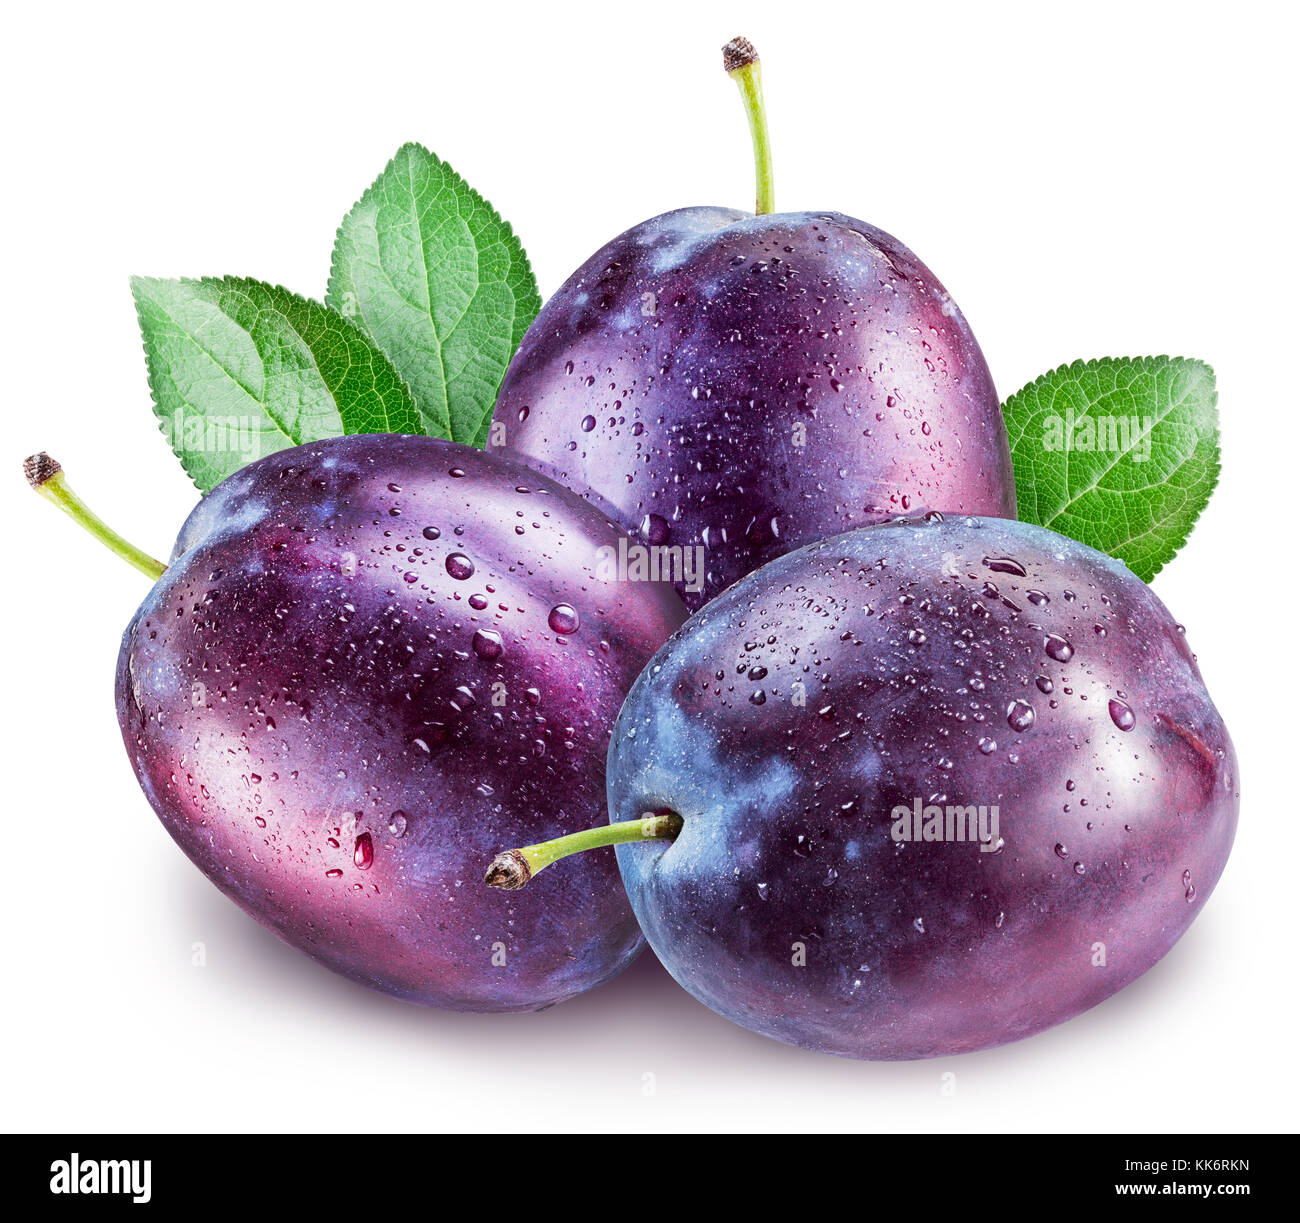 Plums with water drops. File contains clipping path. Stock Photo